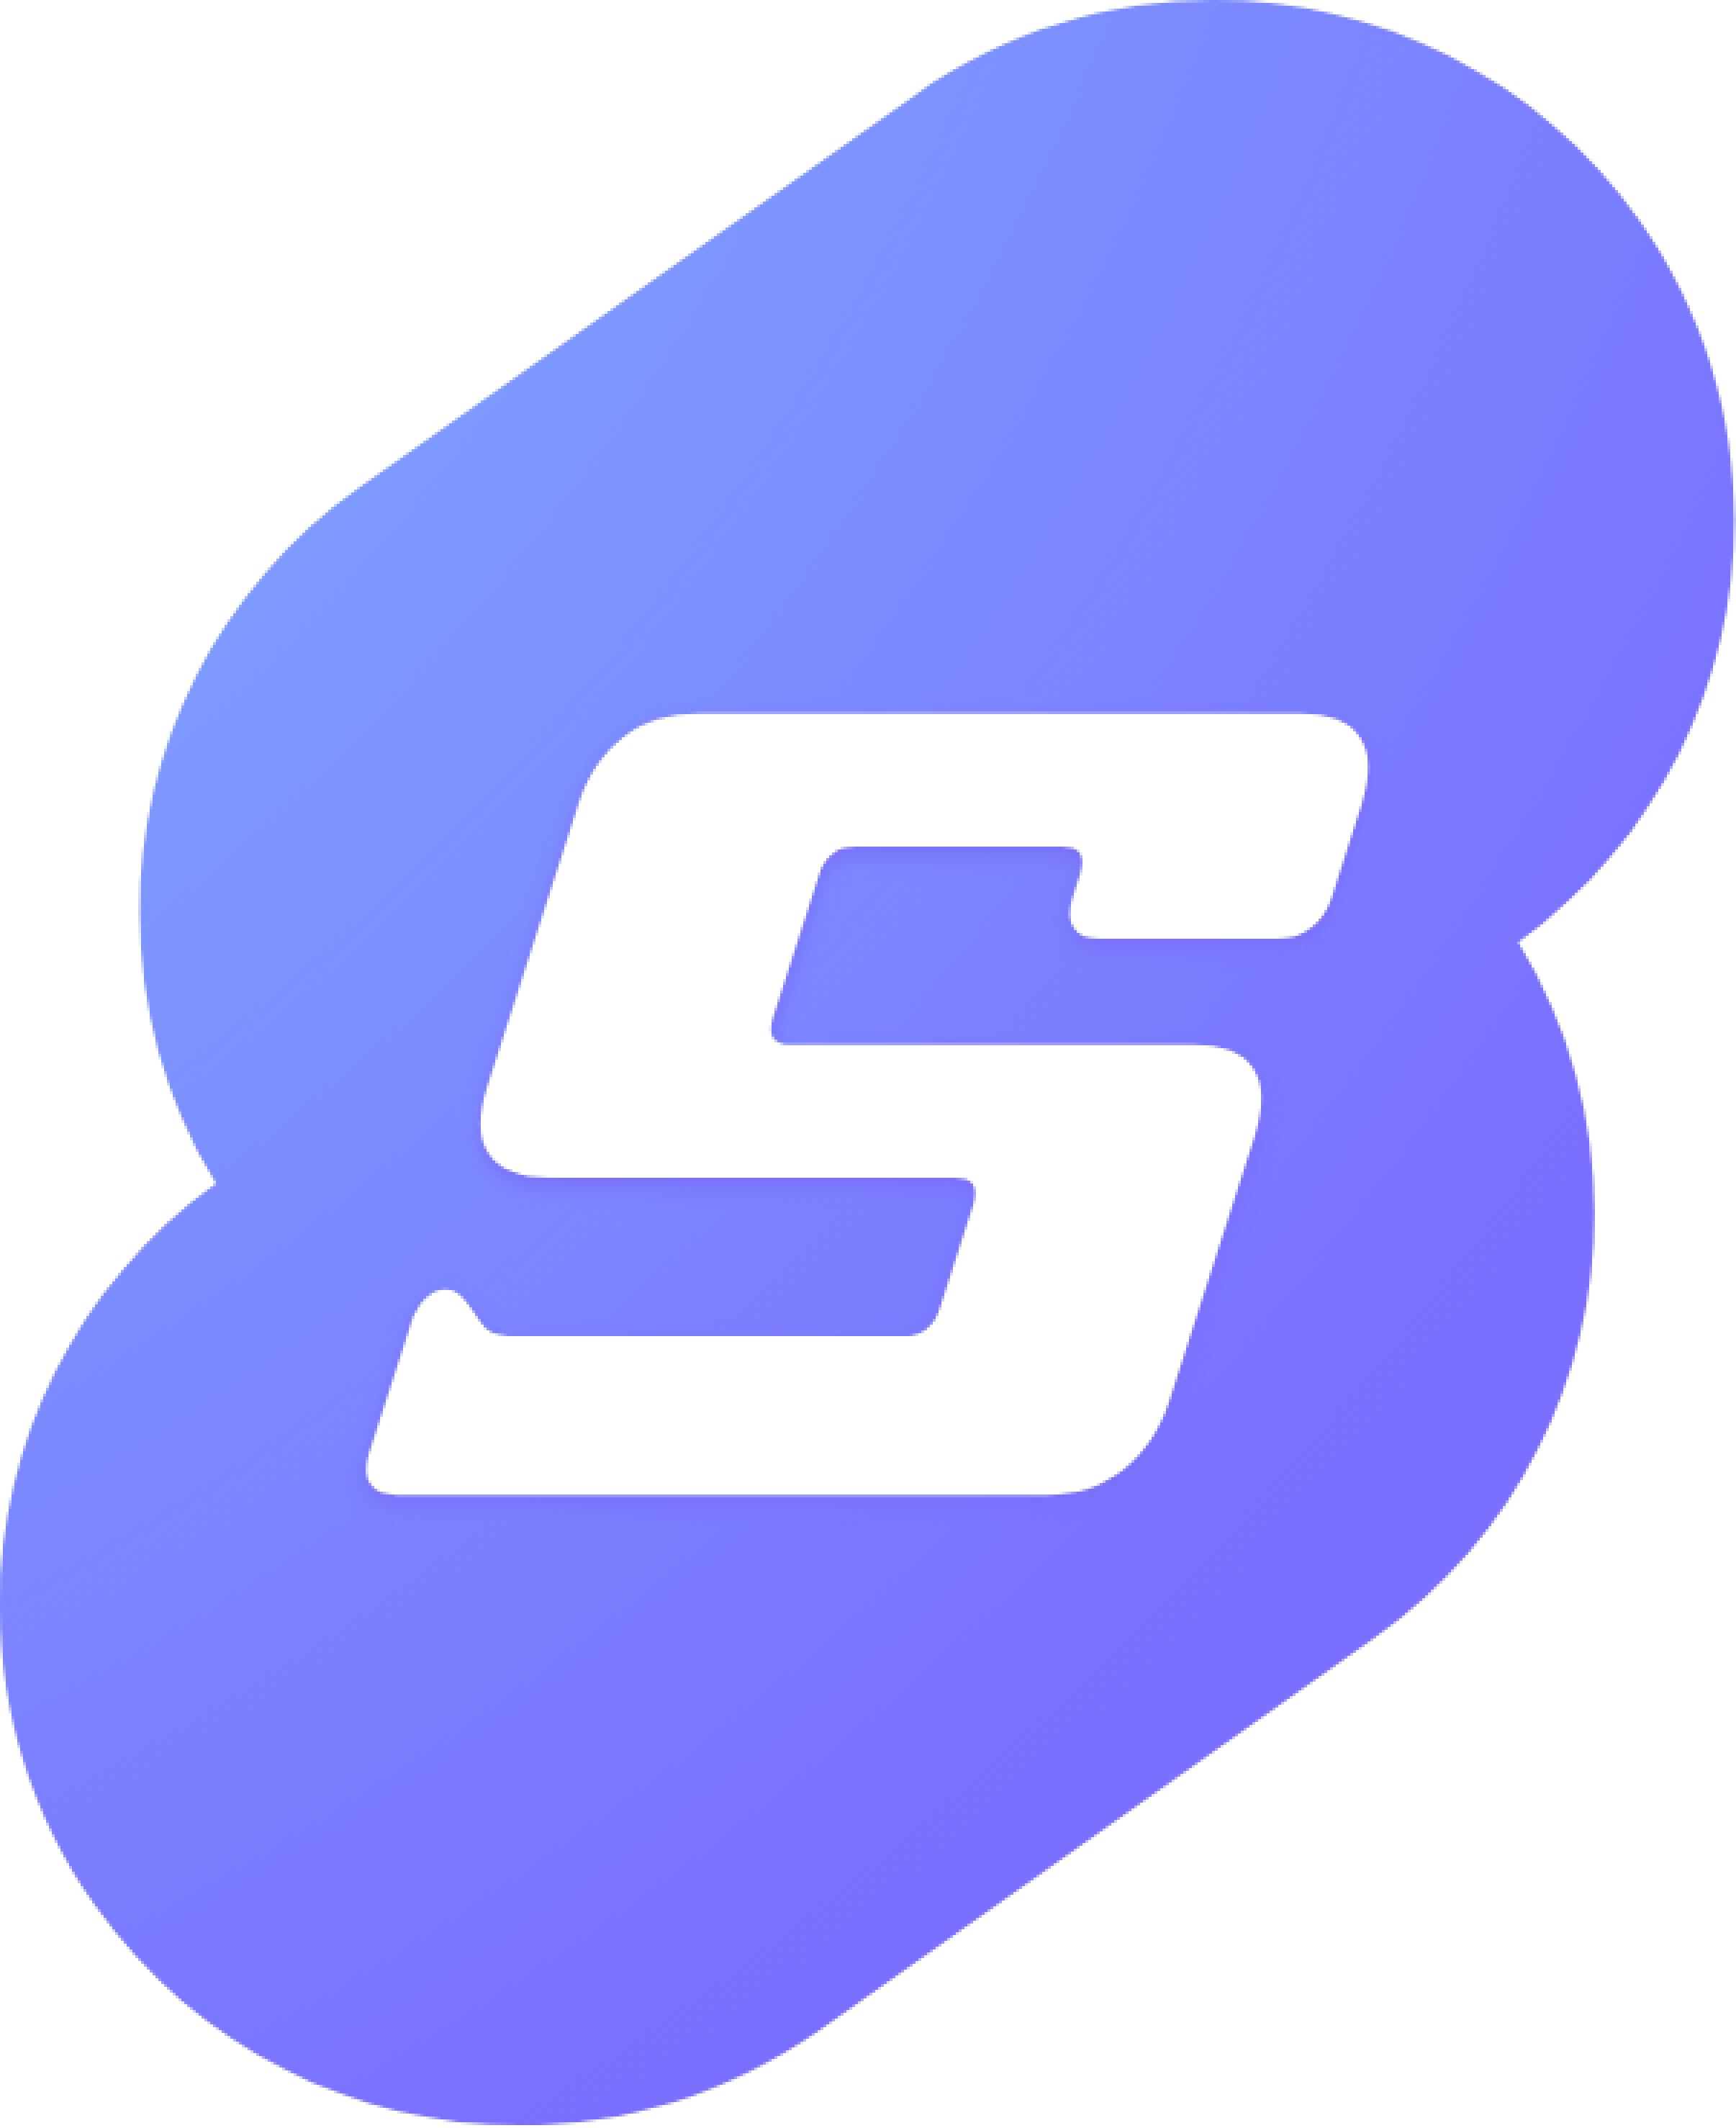 S-Pay